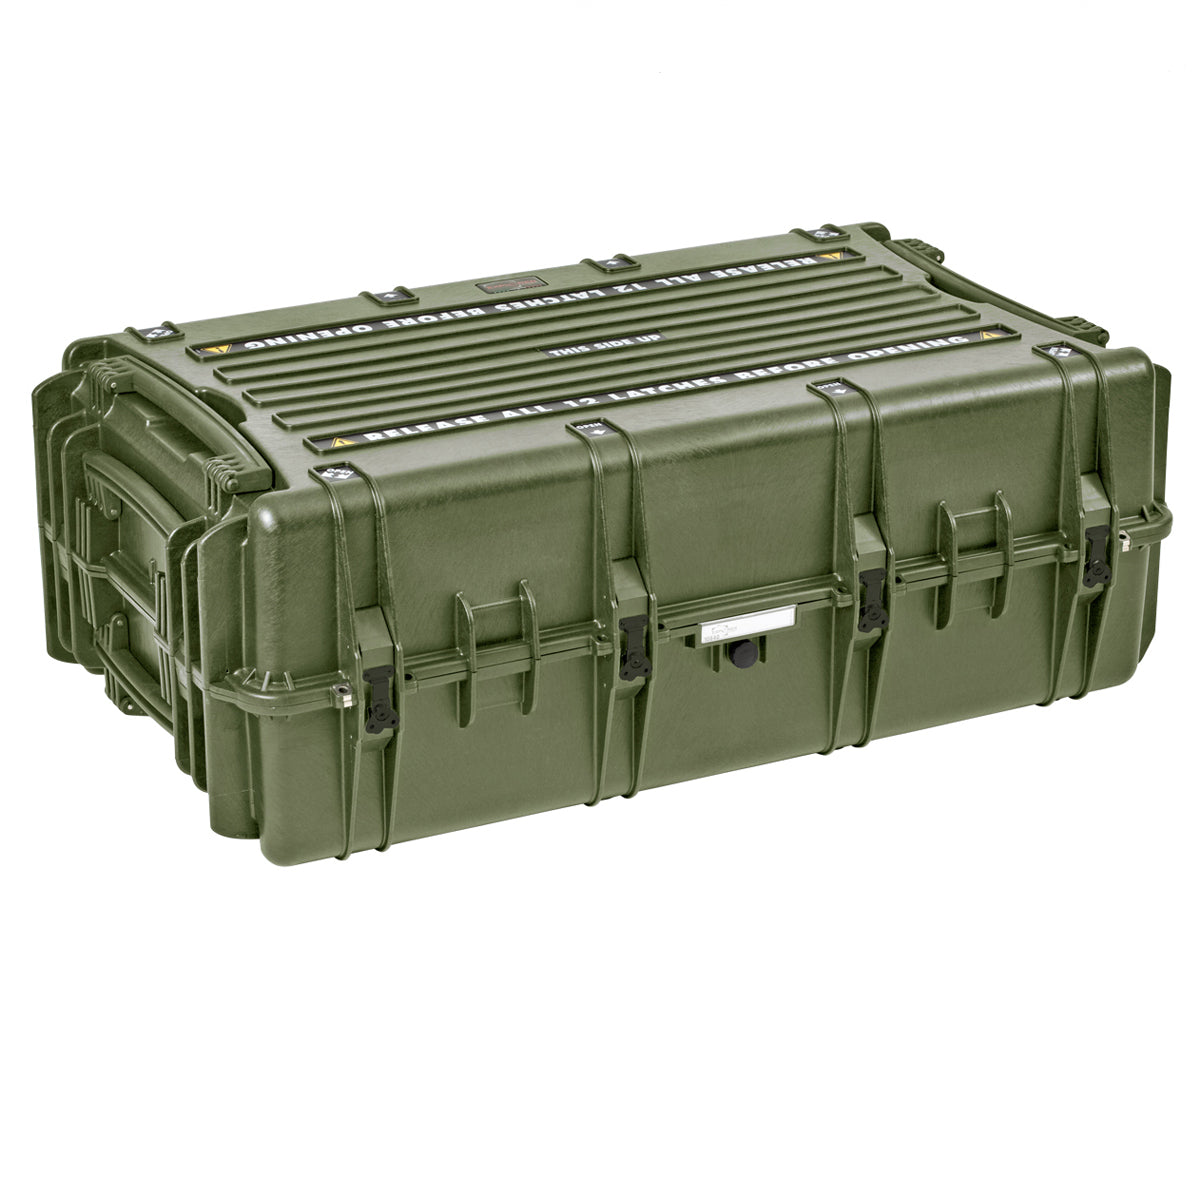 Explorer Cases 10840GE Copolymer Polypropylene Waterproof Case - Military Green Without Foam